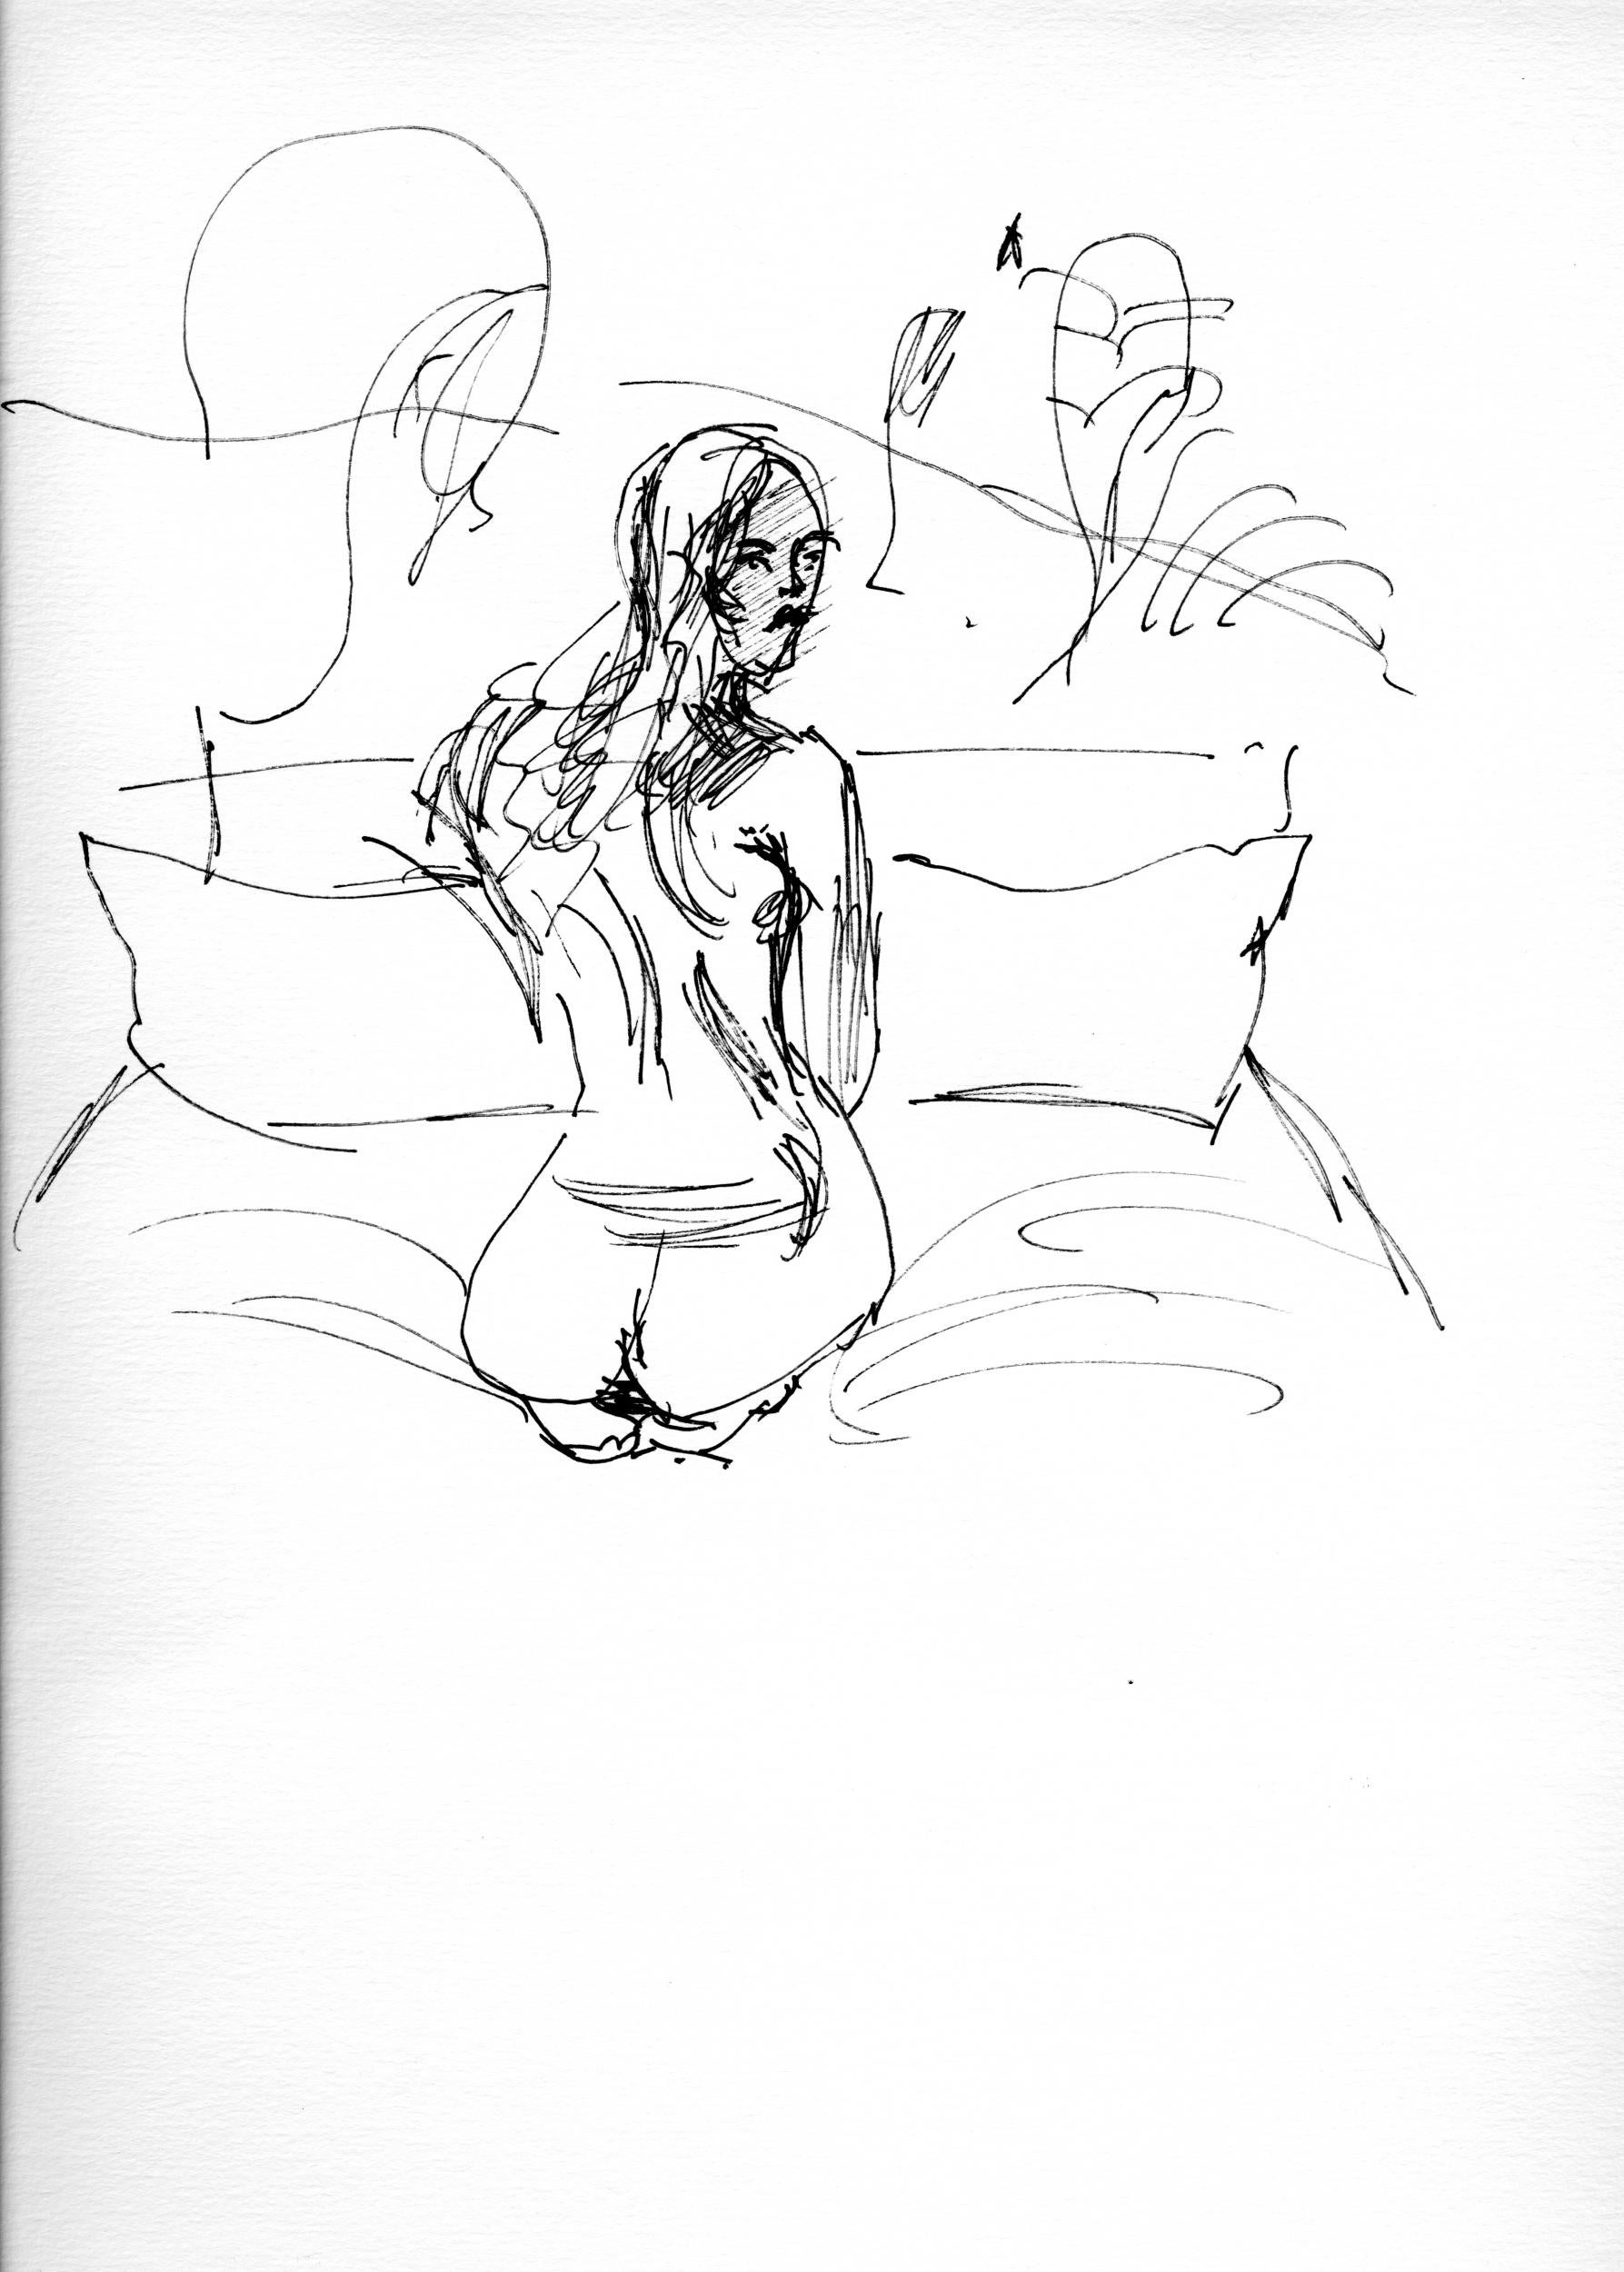 Chloe was ‘unexpectedly pleased’ with her nude sketch (Art Series Hotels )